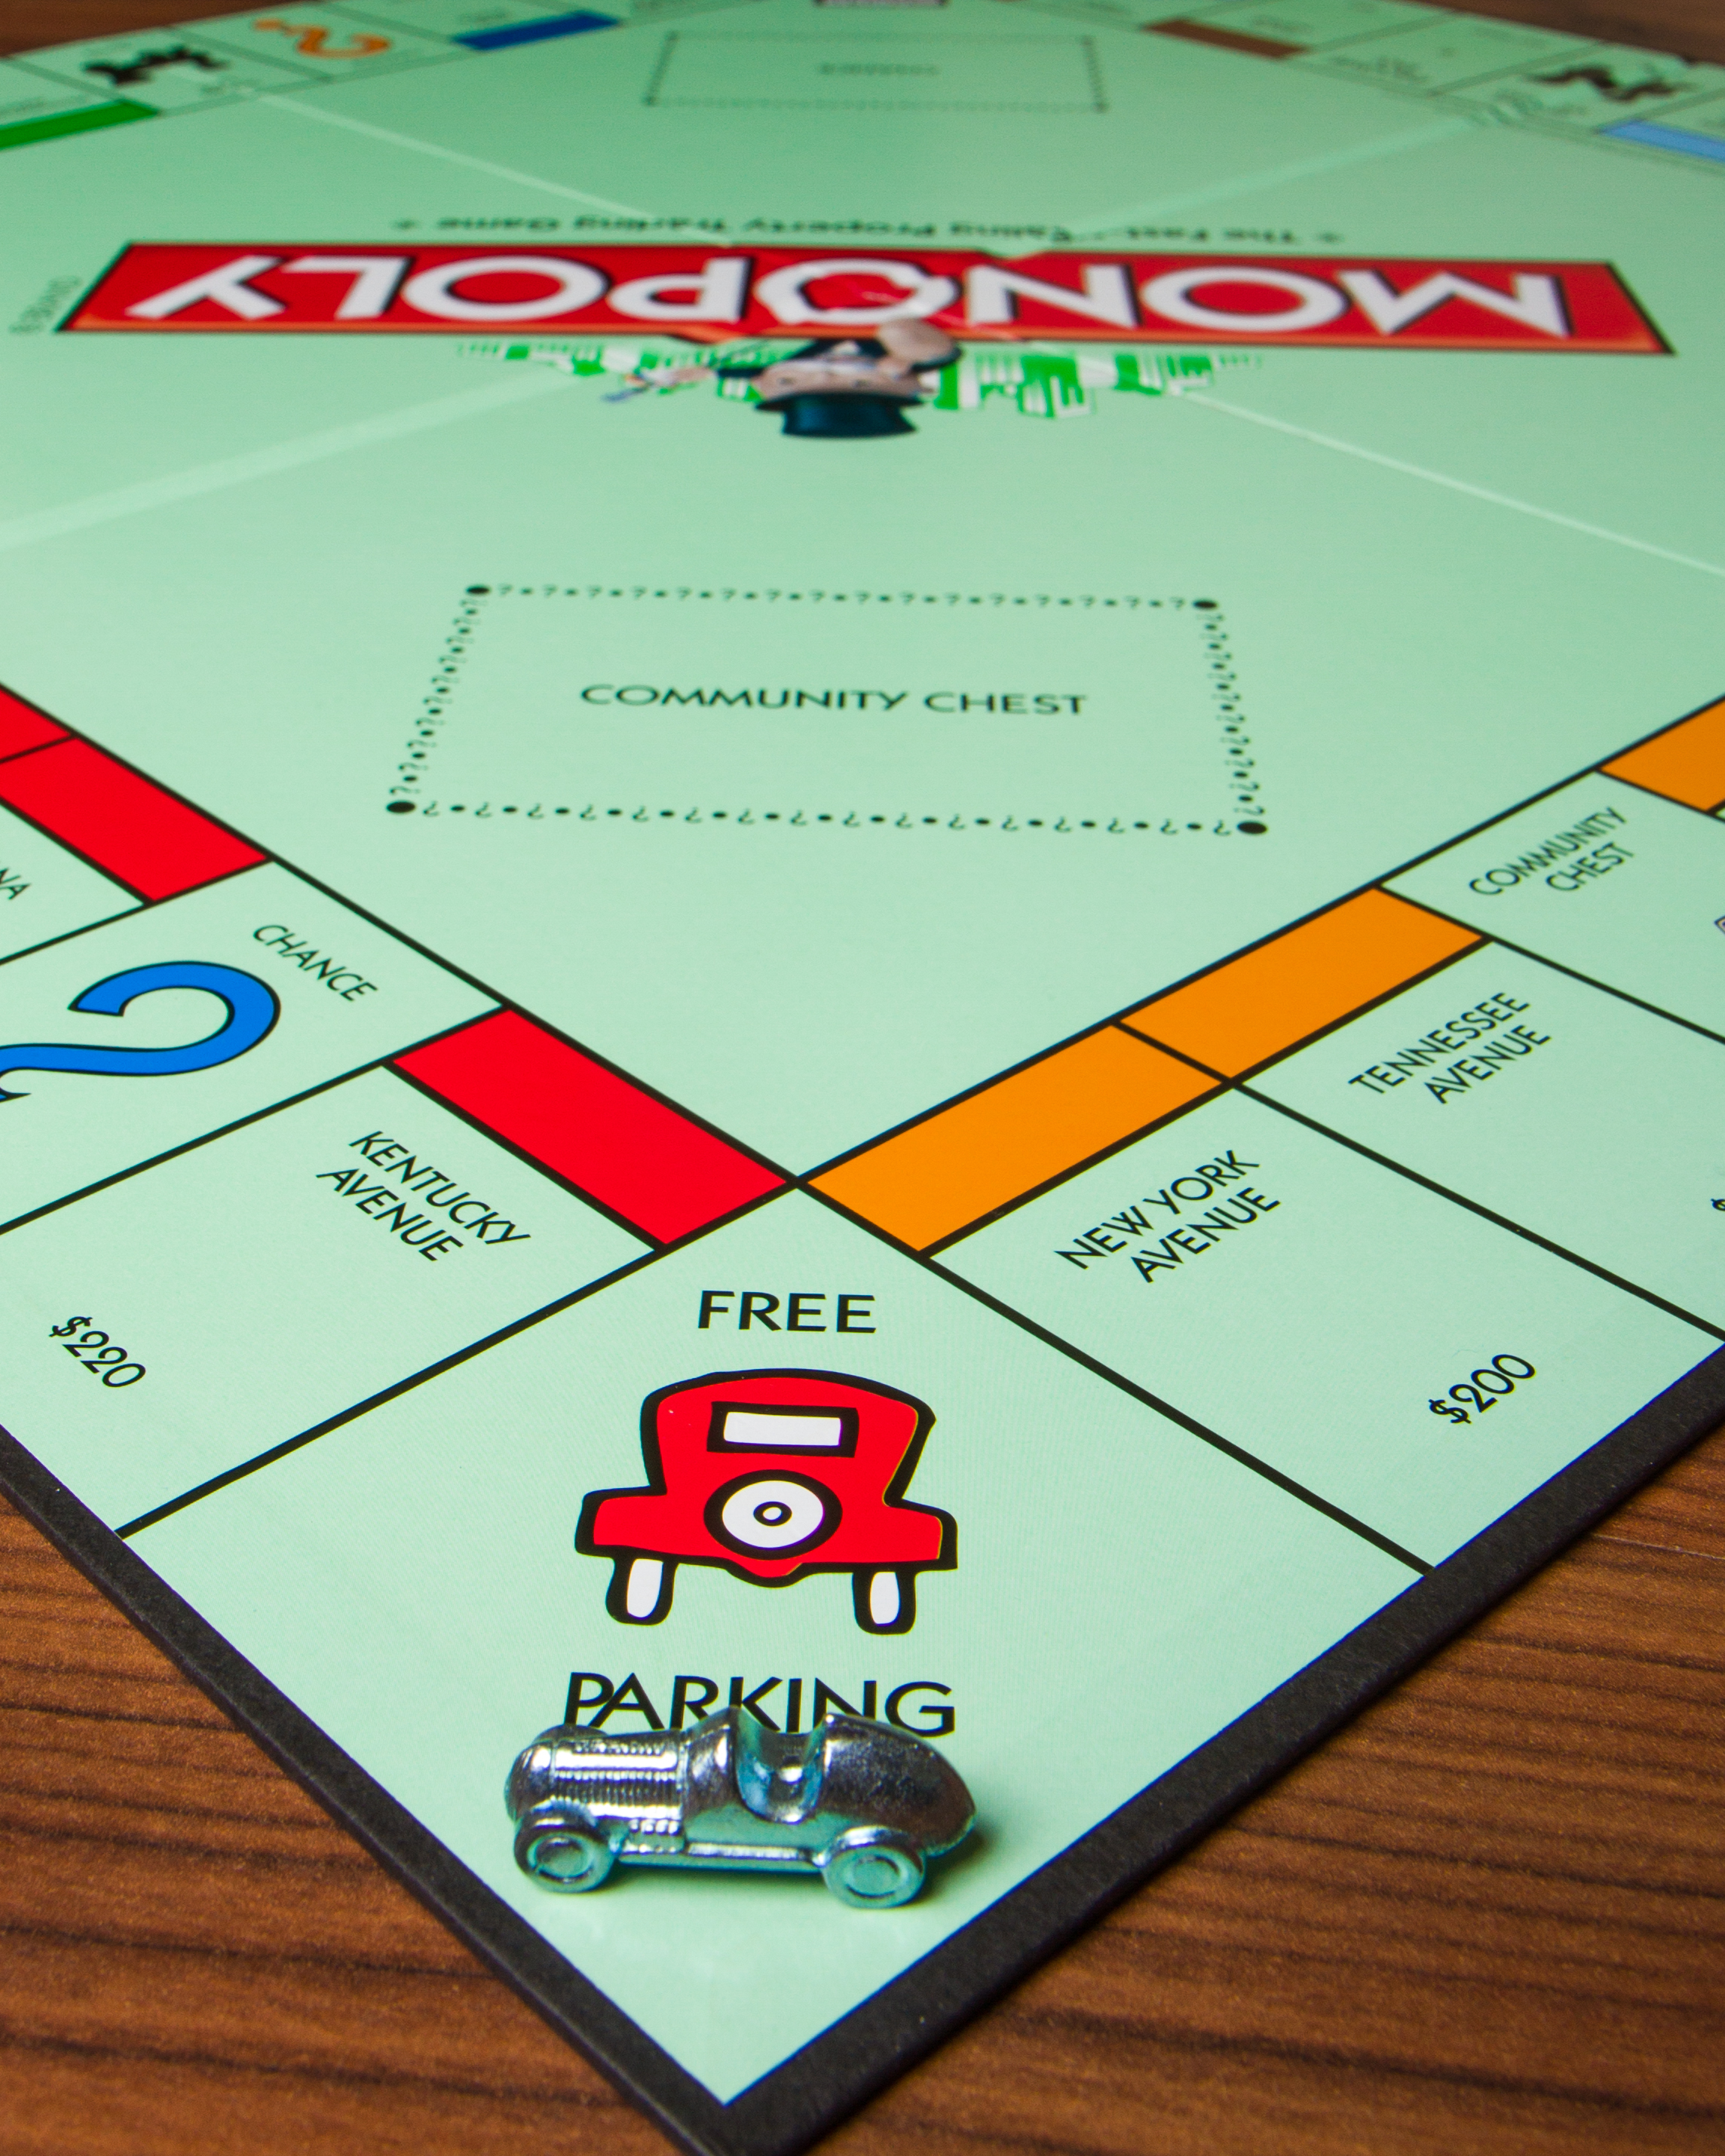 What Exactly Does Landing on Free Parking Do in a Game of Monopoly ...